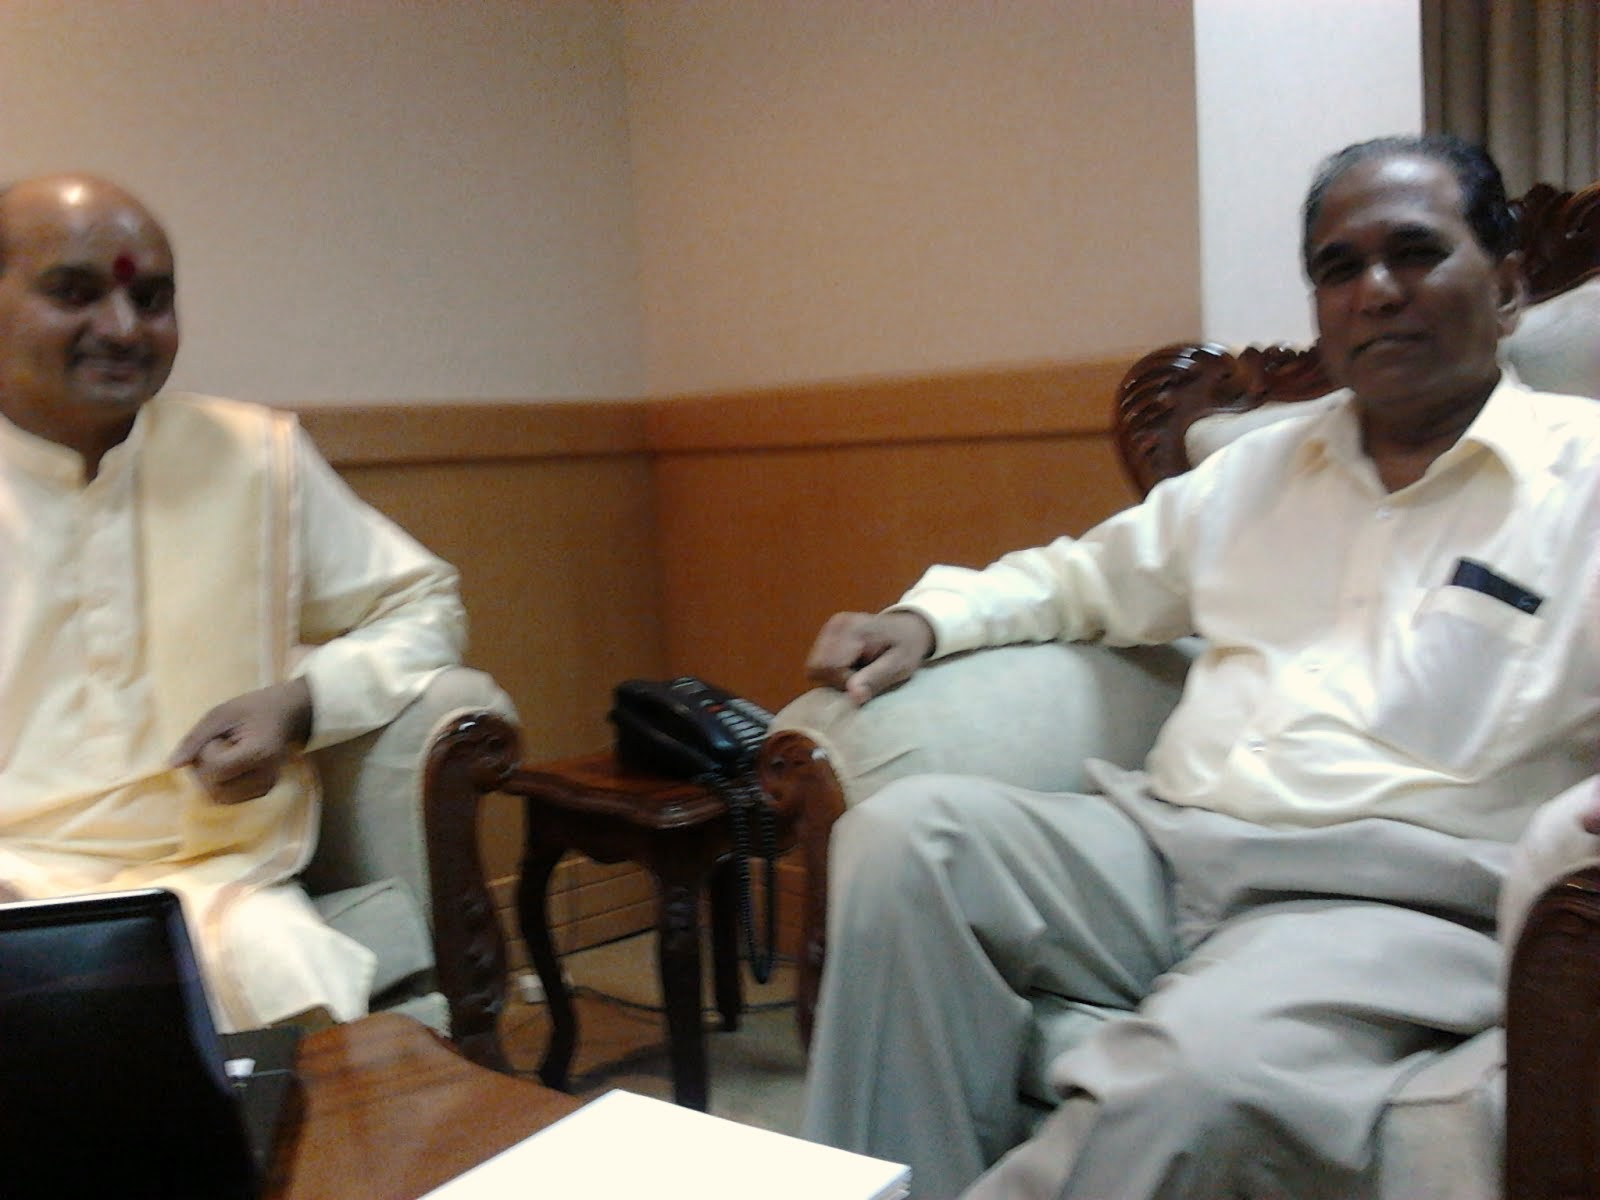 Meeting with The Hon Anil Kumar BACHOO, GOSK, Minister of Public Infrastructure in Mauritius